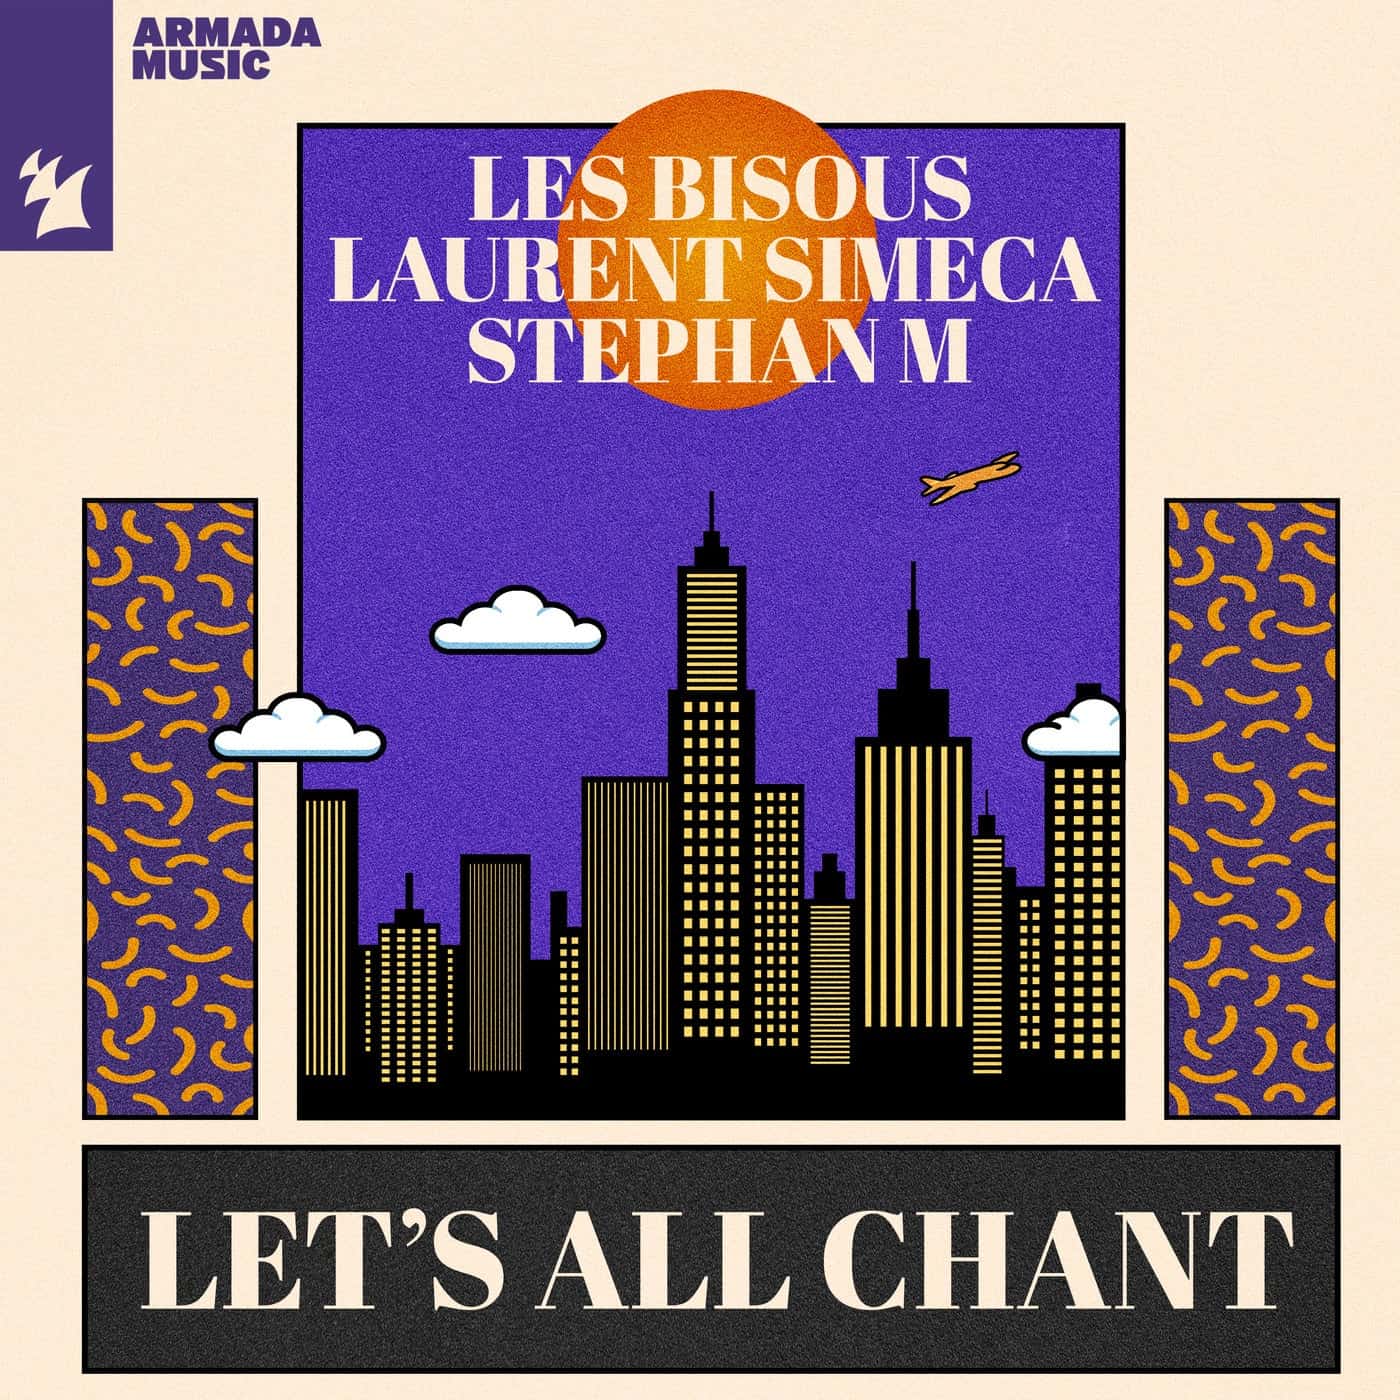 image cover: Stephan M, Laurent Simeca, Les Bisous - Let's All Chant on Armada Music